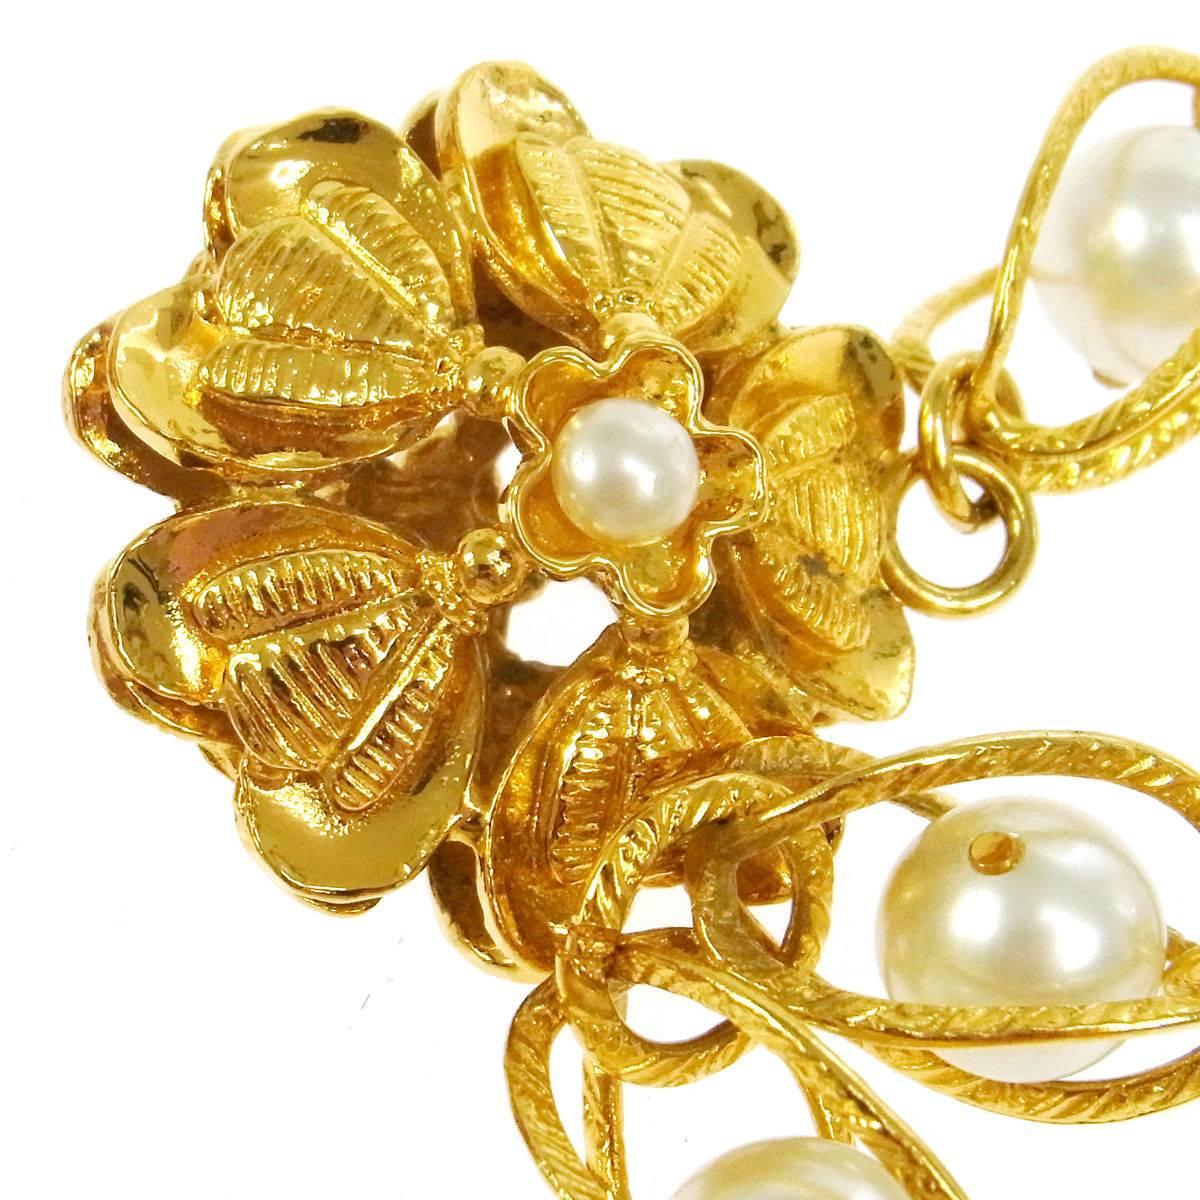 CURATOR'S NOTES

Metal
Gold tone
Faux pearl
Hook closure
Made in France
Width 0.5